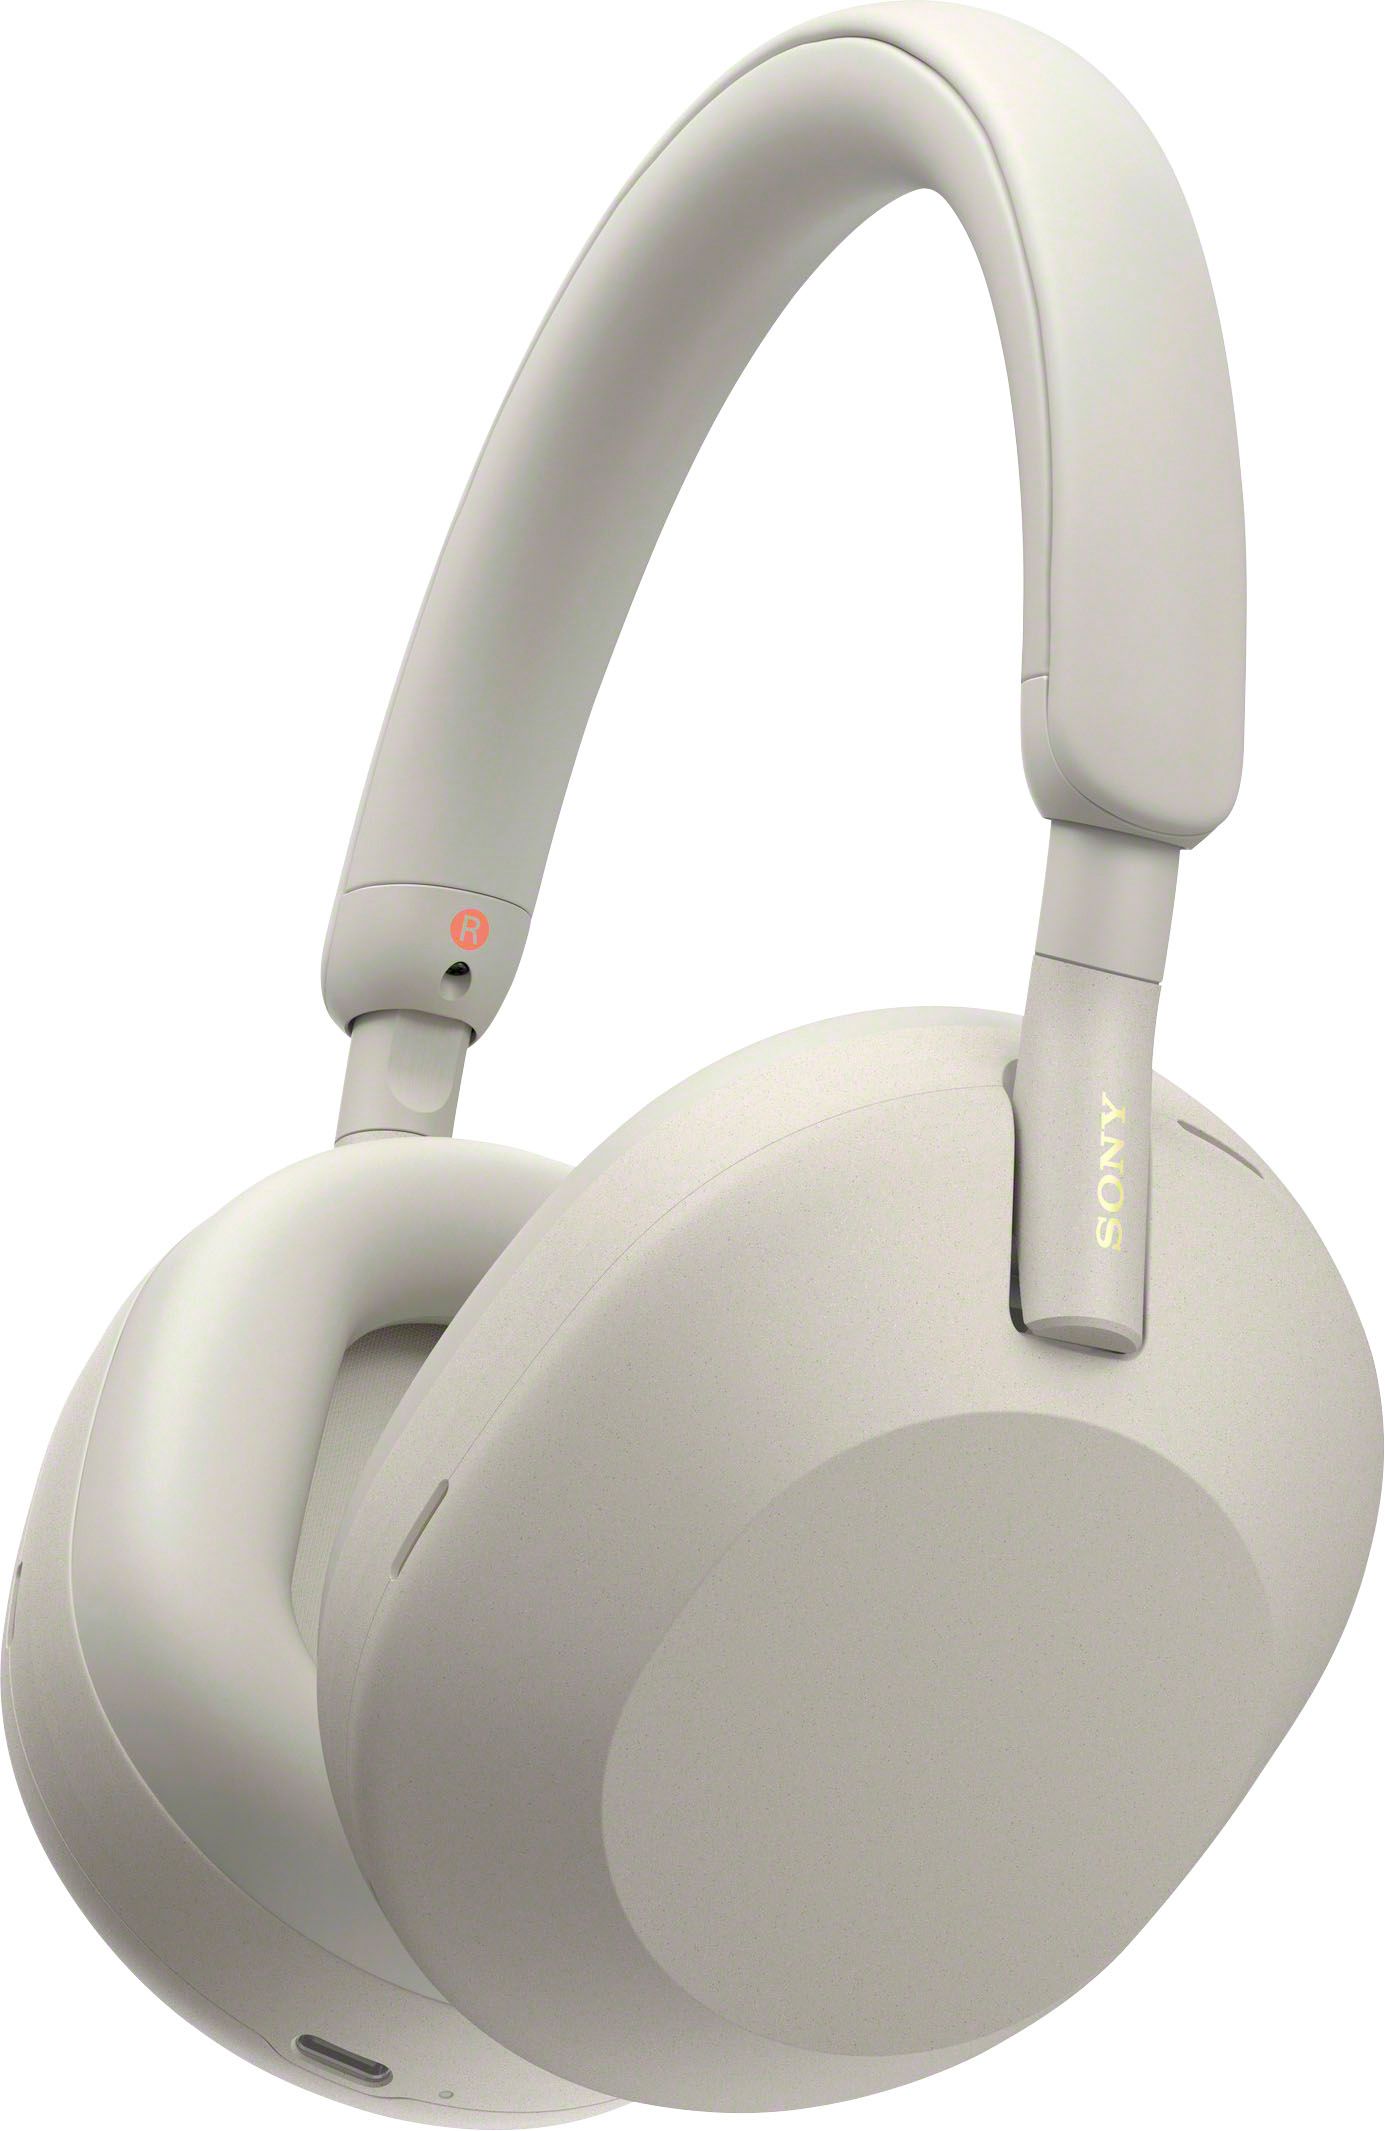 Sony WH-1000XM5 Wireless Noise-Canceling Over-the-Ear Headphones Silver WH1000XM5/S - Best Buy | Best Buy U.S.